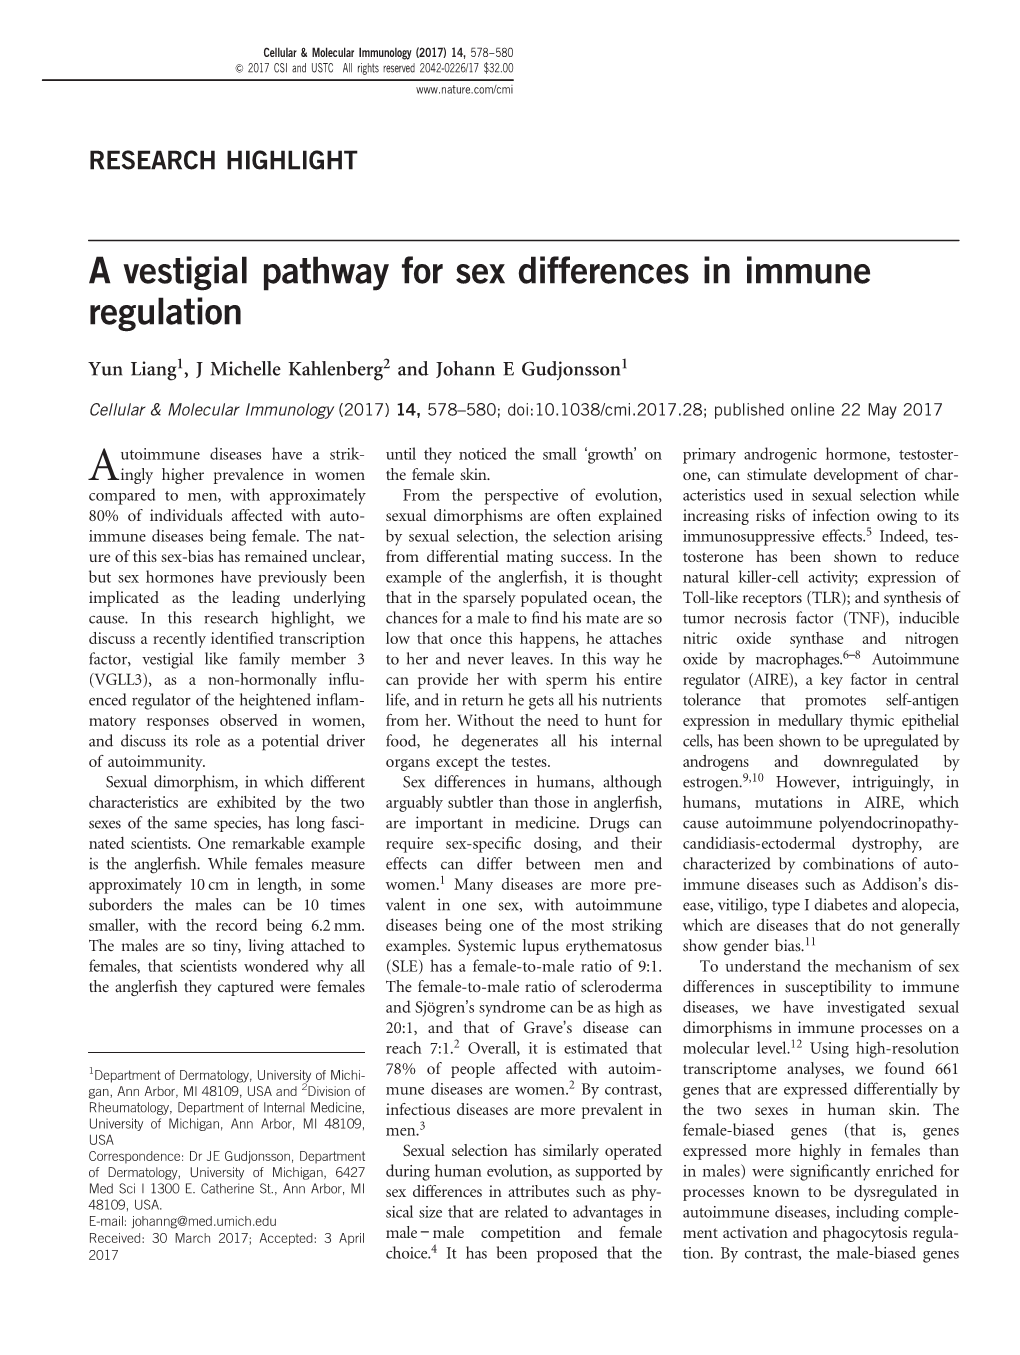 A Vestigial Pathway for Sex Differences in Immune Regulation